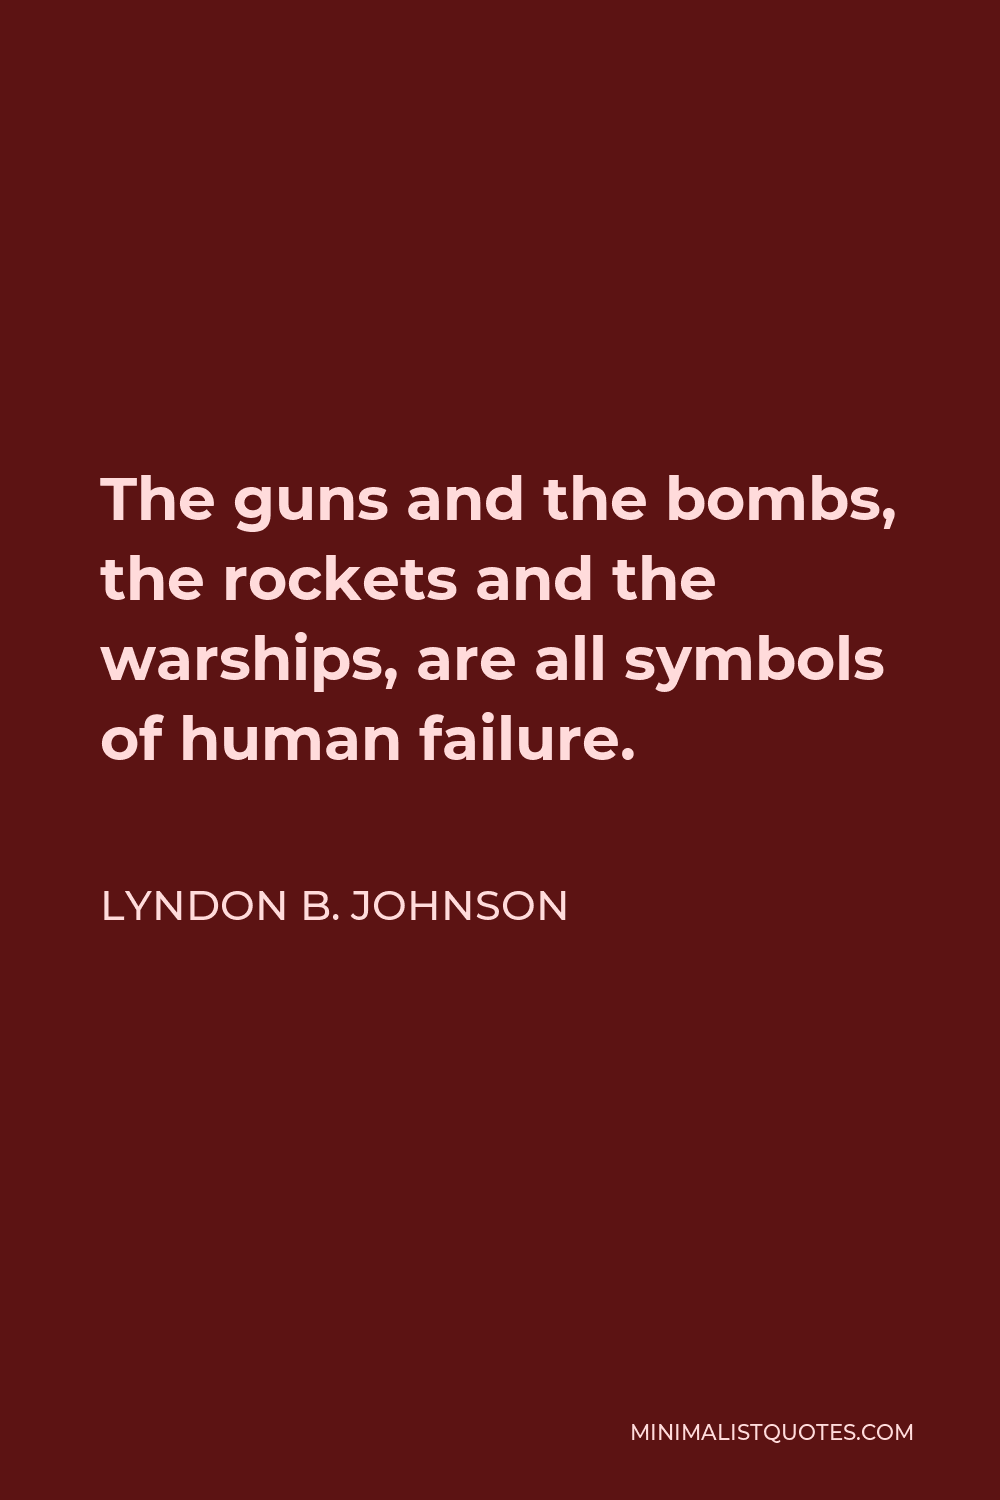 Lyndon B. Johnson Quote - The guns and the bombs, the rockets and the warships, are all symbols of human failure.